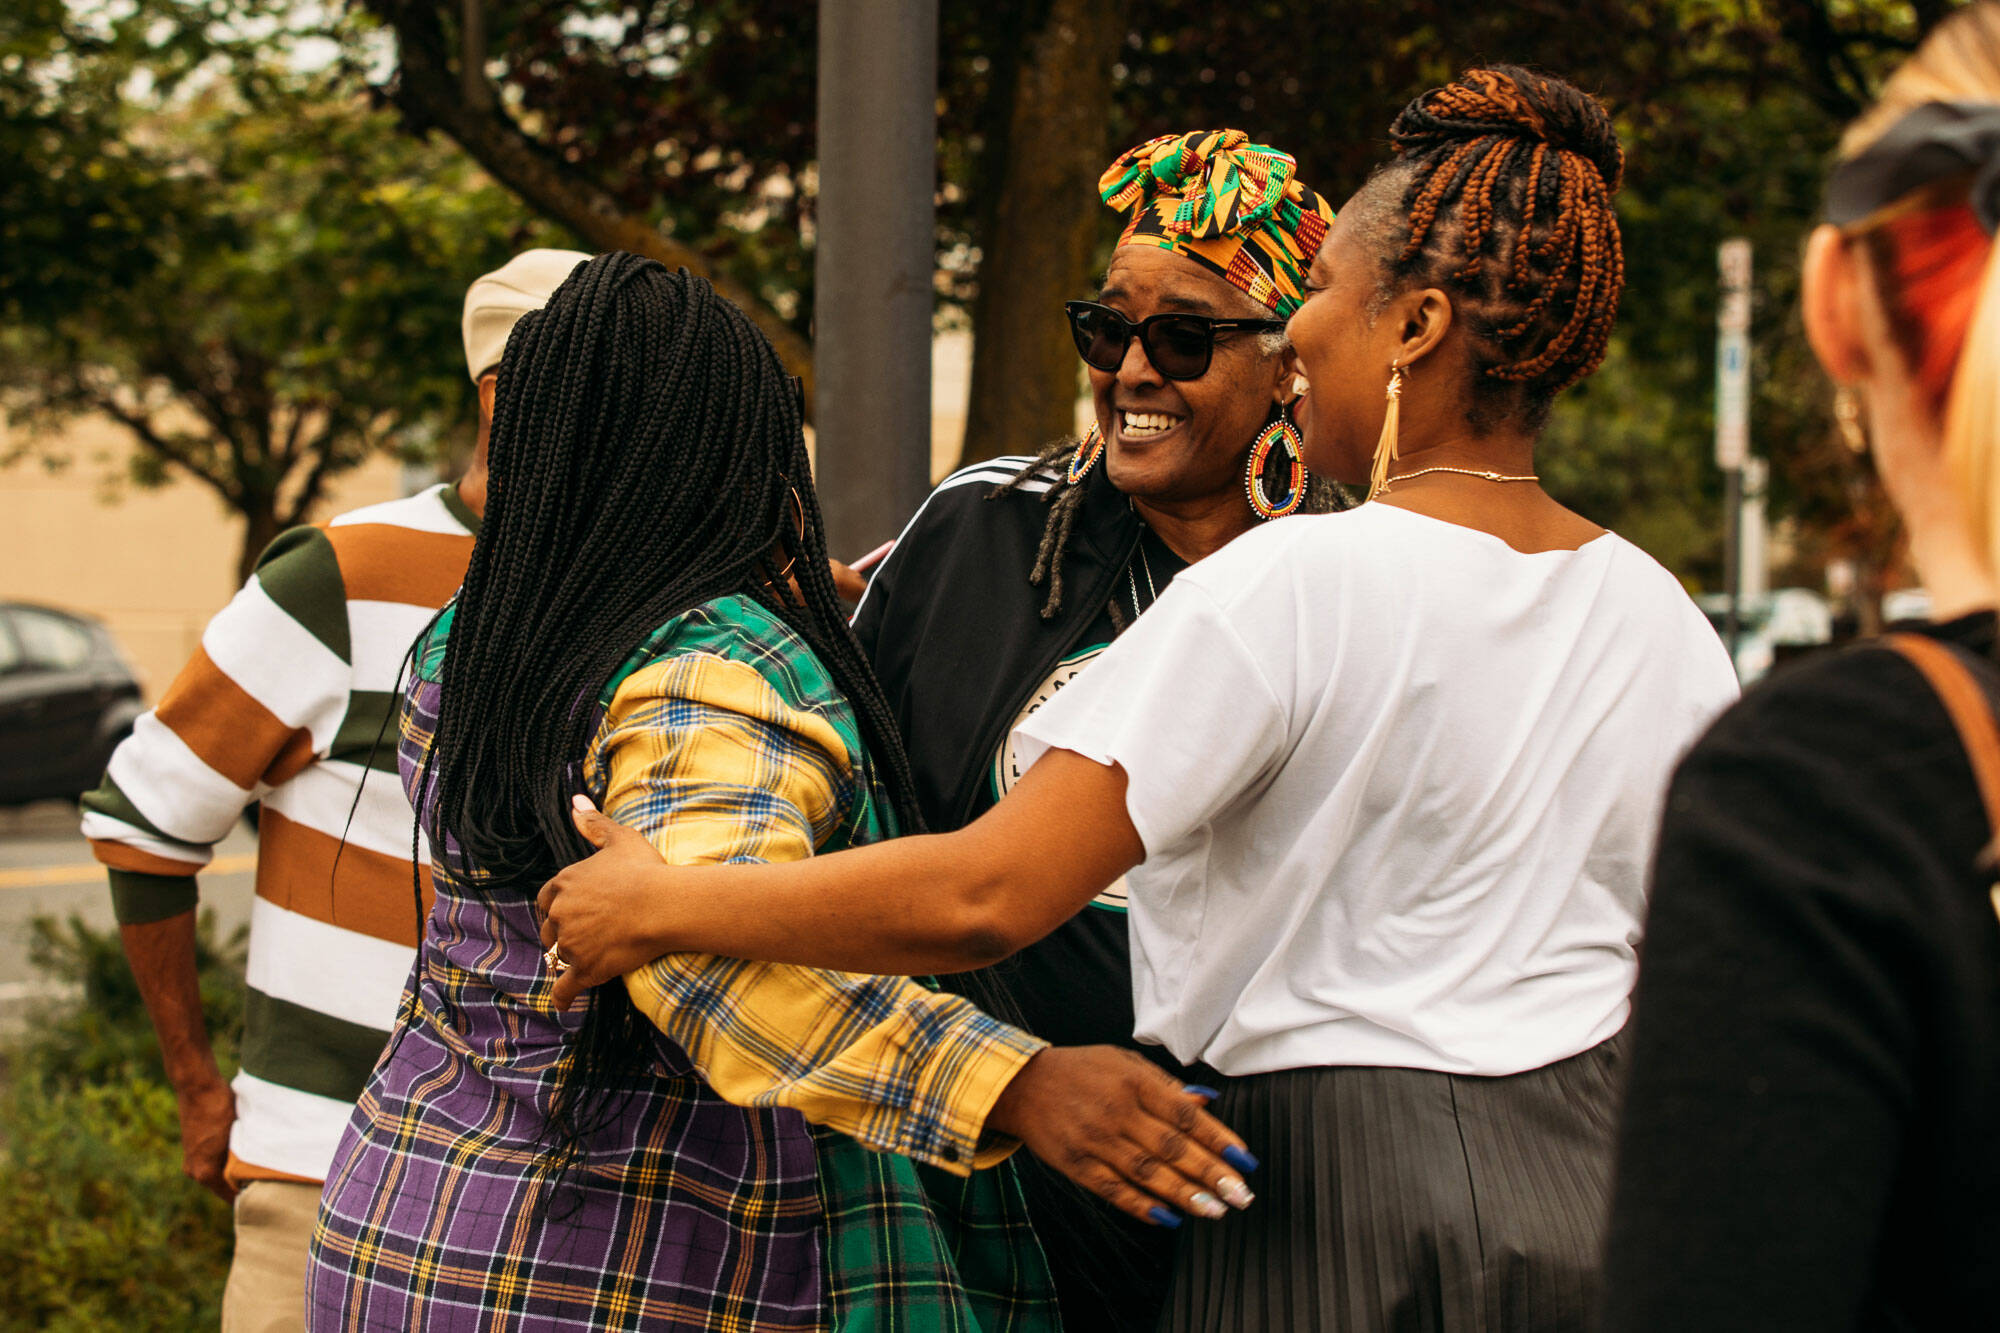 Gwen Allen-Carston, executive director of the Kent Black Action Commission, chats with two women after helping to raise the Juneteenth flag June 15 at Kent City Hall. COURTESY PHOTO, City of Kent